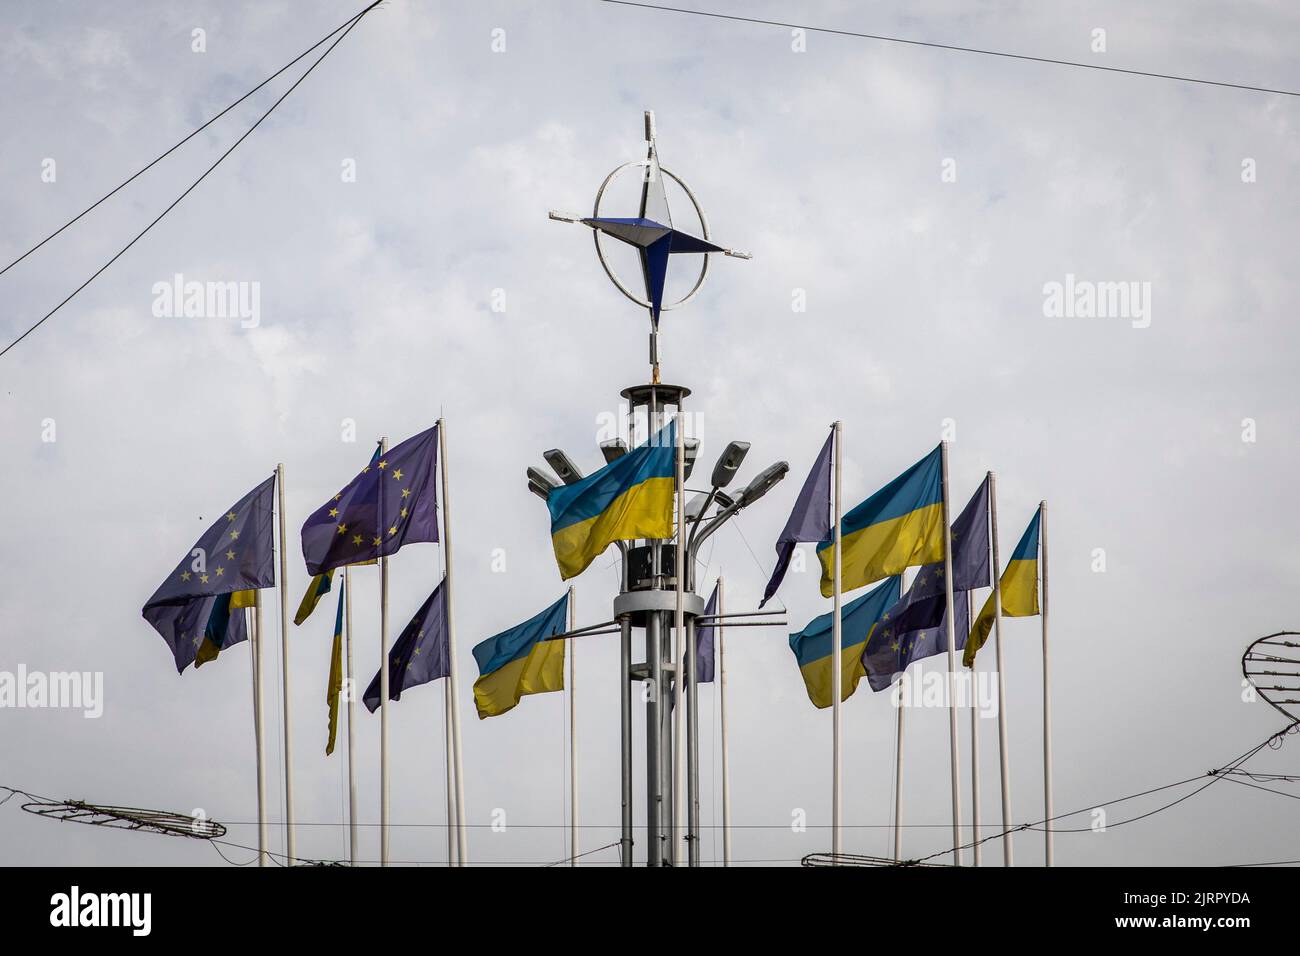 Kyiv, Ukraine. 23rd Aug, 2022. Ukraine's national flags and EU flags are seen under the NATO logo in Kyiv. As dedicated to the upcoming Independence Day of Ukraine, and nearly 6 months after the full-scale invasion of Ukraine on February 24, the country's capital Kyiv held an exhibition on the main street of Khreschaytk Street showing multiple destroyed military equipment, tanks and weapons from The Armed Forces of The Russian Federation (AFRF).As the Russian full invasion of Ukraine started on February 24, the war has killed numerous civilians and soldiers, nearly 9000 Ukrainian military p Stock Photo